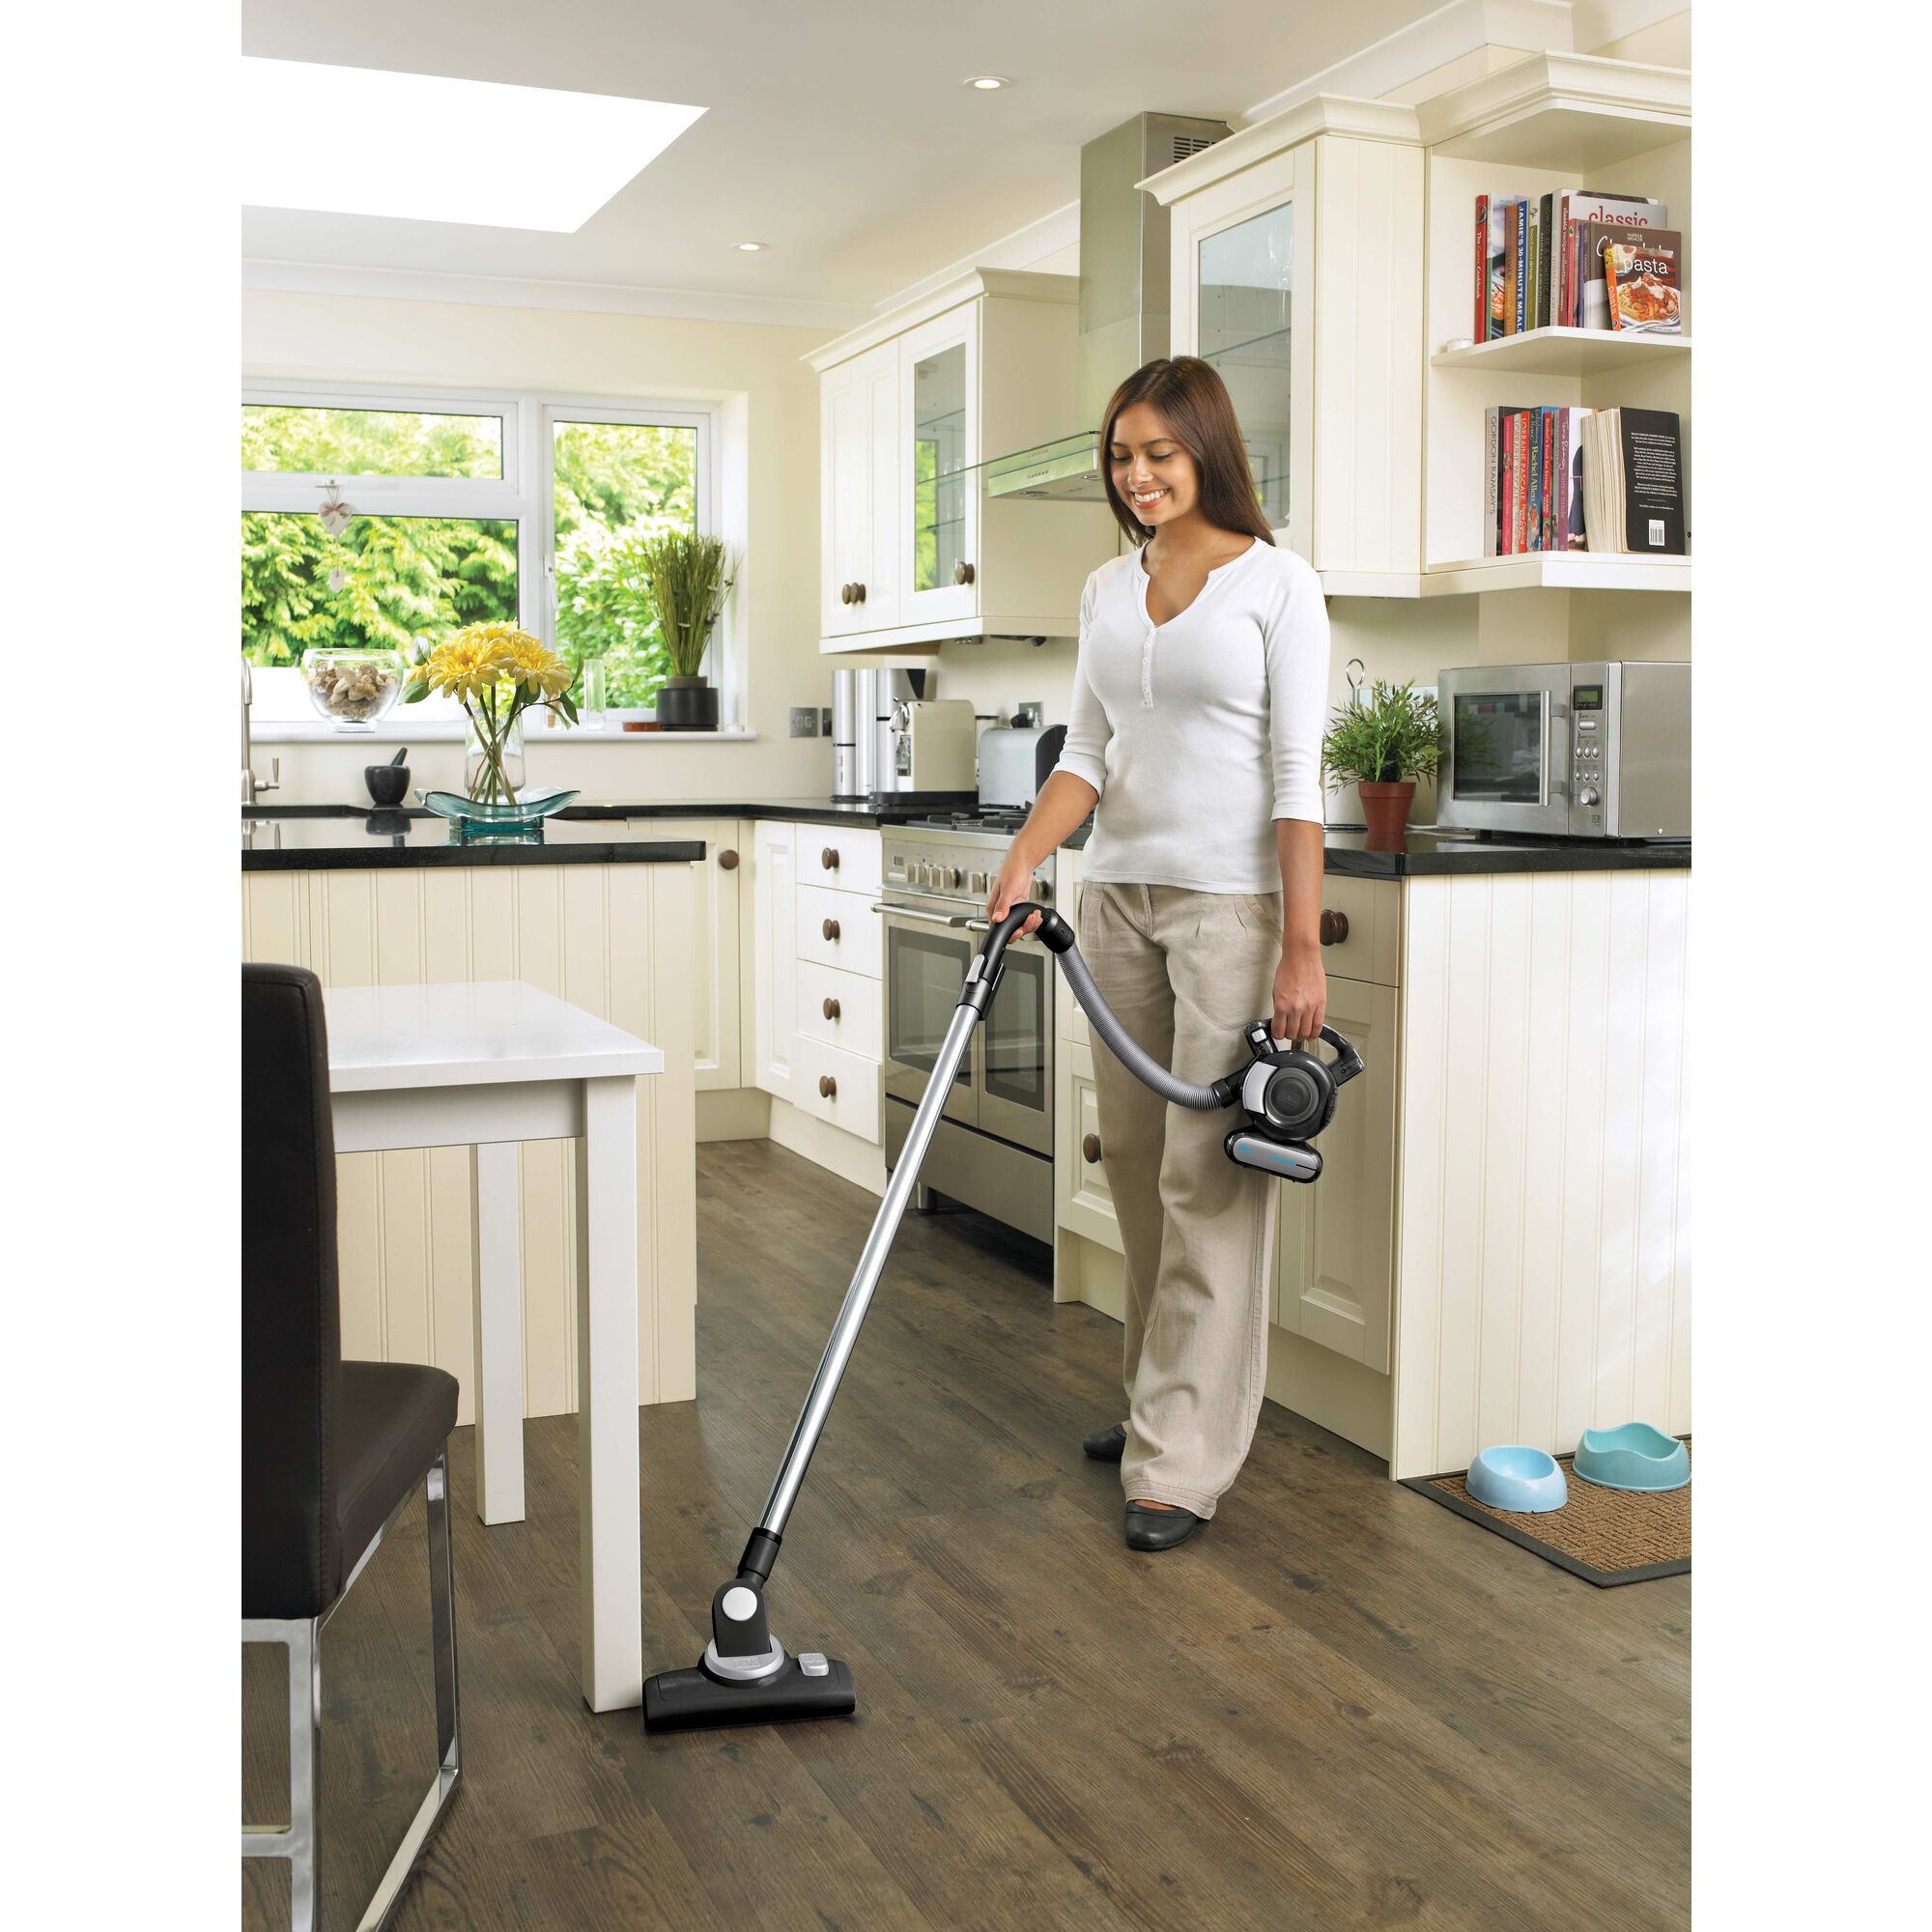 Dustbuster flex cordless hand vacuum being used by a person to clean floor.\n